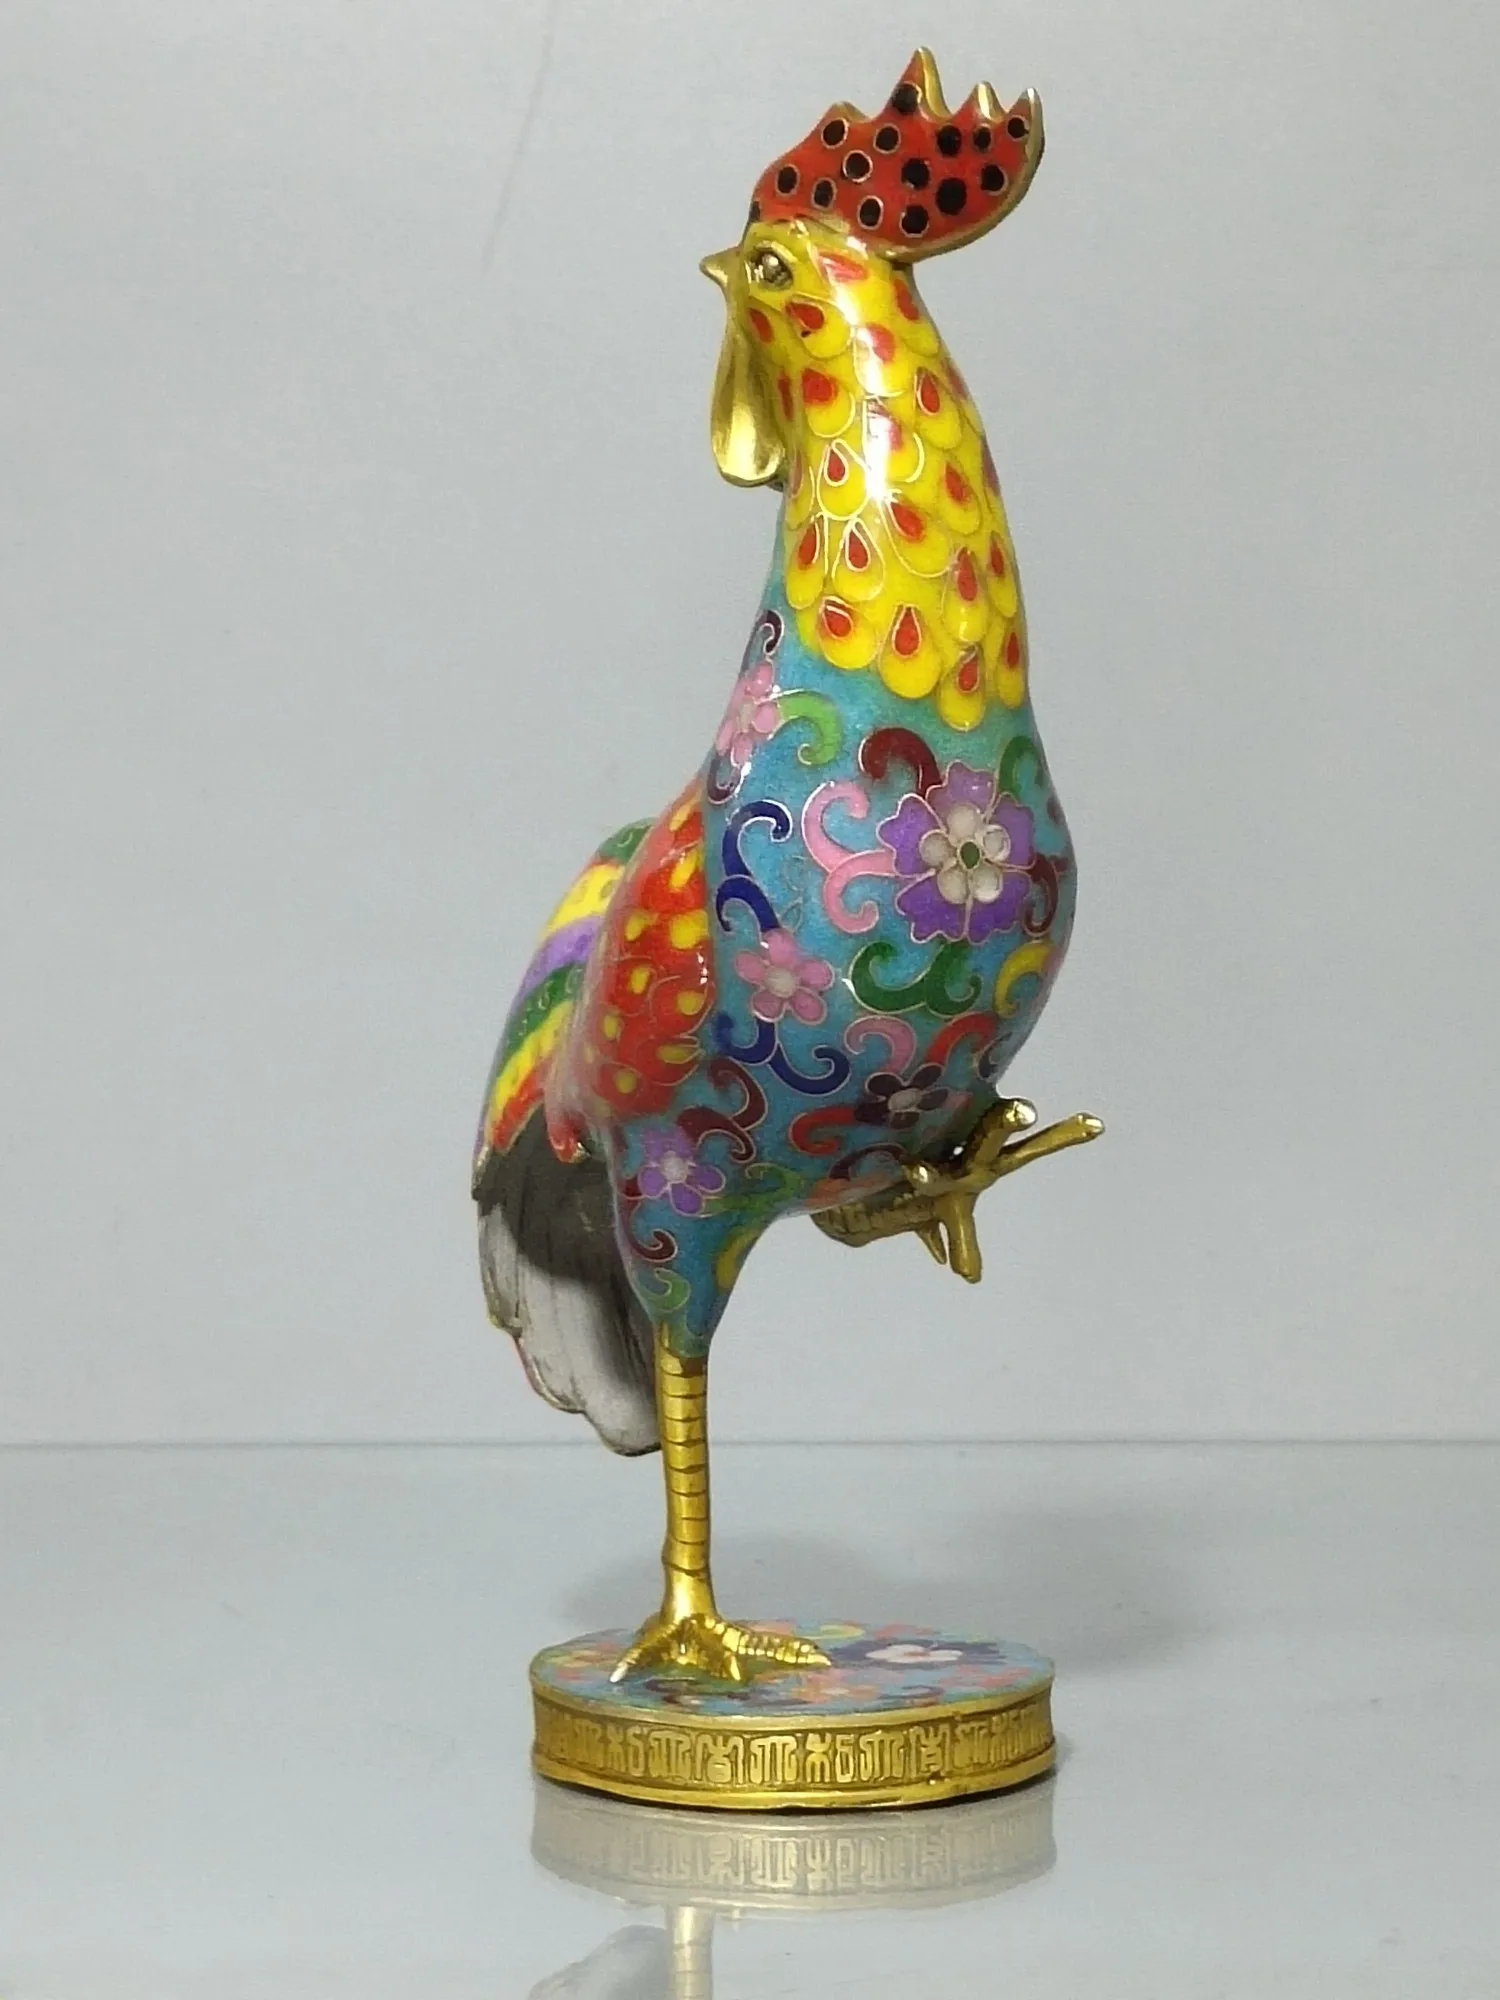 Accessories aesthetic Cloisonne Filigree Golden Rooster Independent Ornament Collection value Exquisite gifts for best friends